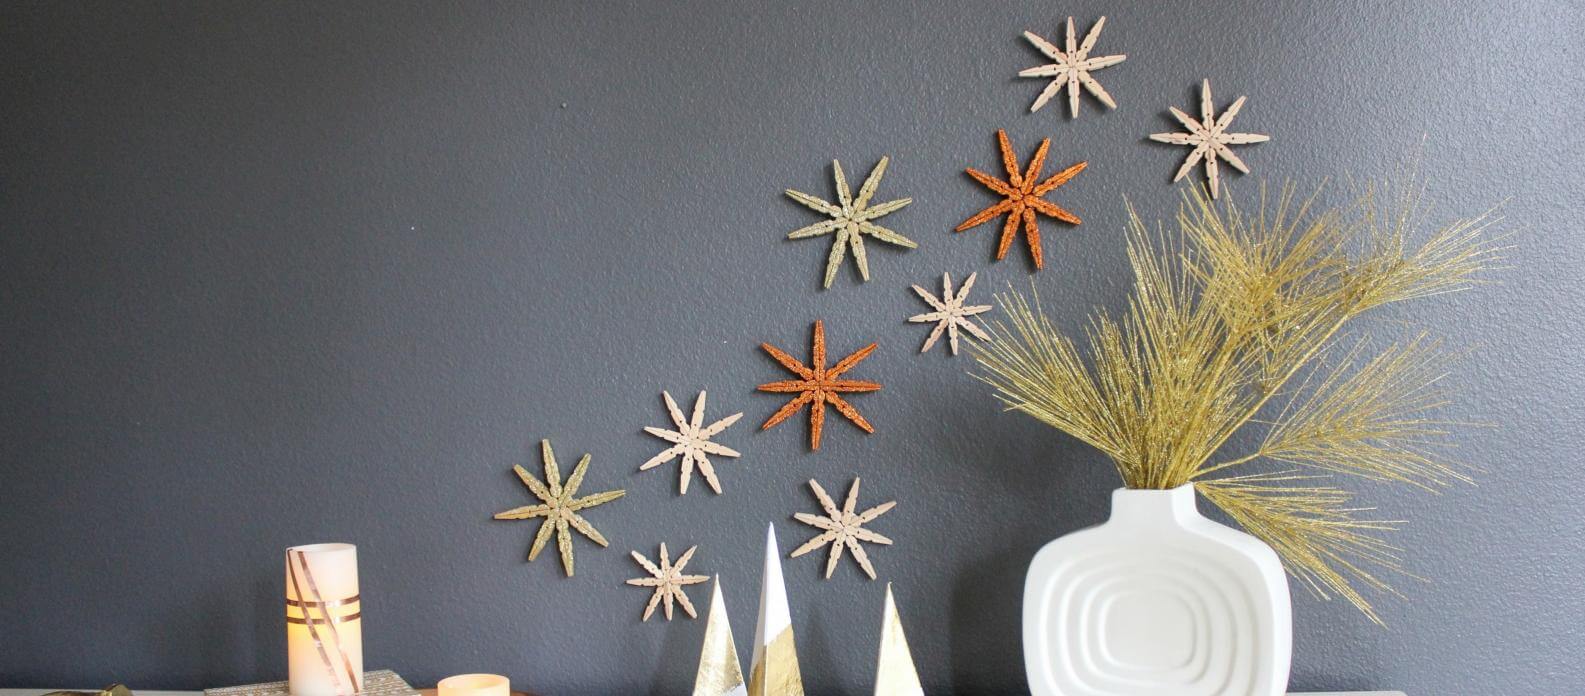 Pretty Snowflake Wall Decoration Craft Made With Colorful Clothespins - Creative Clothespin Projects - Easy & Fun